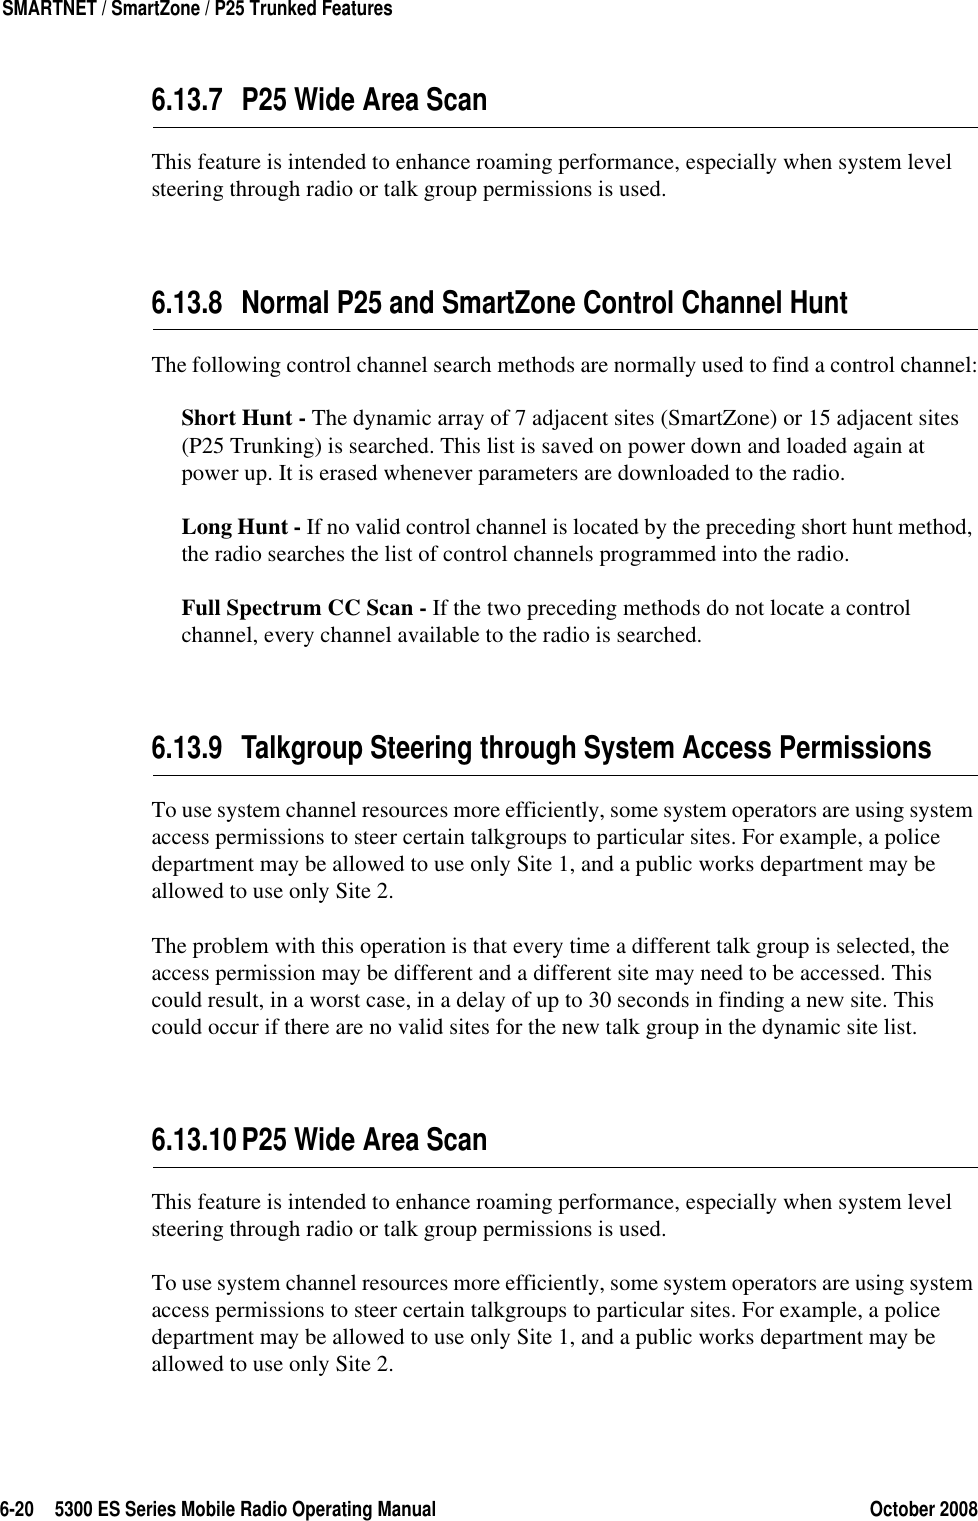 6-20 5300 ES Series Mobile Radio Operating Manual October 2008SMARTNET / SmartZone / P25 Trunked Features6.13.7 P25 Wide Area ScanThis feature is intended to enhance roaming performance, especially when system level steering through radio or talk group permissions is used.6.13.8 Normal P25 and SmartZone Control Channel HuntThe following control channel search methods are normally used to find a control channel:Short Hunt - The dynamic array of 7 adjacent sites (SmartZone) or 15 adjacent sites (P25 Trunking) is searched. This list is saved on power down and loaded again at power up. It is erased whenever parameters are downloaded to the radio.Long Hunt - If no valid control channel is located by the preceding short hunt method, the radio searches the list of control channels programmed into the radio.Full Spectrum CC Scan - If the two preceding methods do not locate a control channel, every channel available to the radio is searched.6.13.9 Talkgroup Steering through System Access PermissionsTo use system channel resources more efficiently, some system operators are using system access permissions to steer certain talkgroups to particular sites. For example, a police department may be allowed to use only Site 1, and a public works department may be allowed to use only Site 2.The problem with this operation is that every time a different talk group is selected, the access permission may be different and a different site may need to be accessed. This could result, in a worst case, in a delay of up to 30 seconds in finding a new site. This could occur if there are no valid sites for the new talk group in the dynamic site list.6.13.10P25 Wide Area ScanThis feature is intended to enhance roaming performance, especially when system level steering through radio or talk group permissions is used.To use system channel resources more efficiently, some system operators are using system access permissions to steer certain talkgroups to particular sites. For example, a police department may be allowed to use only Site 1, and a public works department may be allowed to use only Site 2.